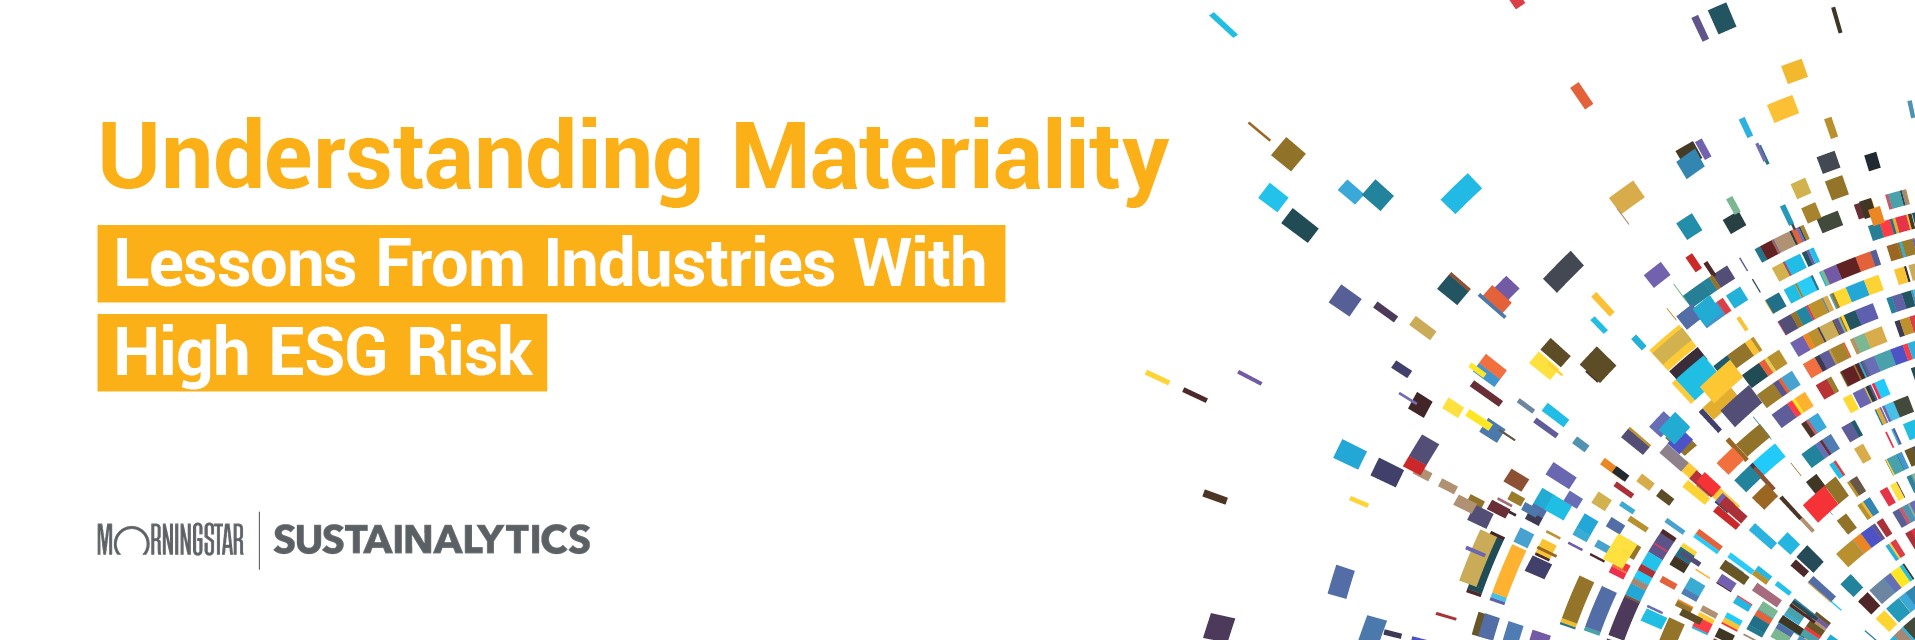 Download our ebook, Understanding Materiality: Lessons From Industries With High ESG Risk